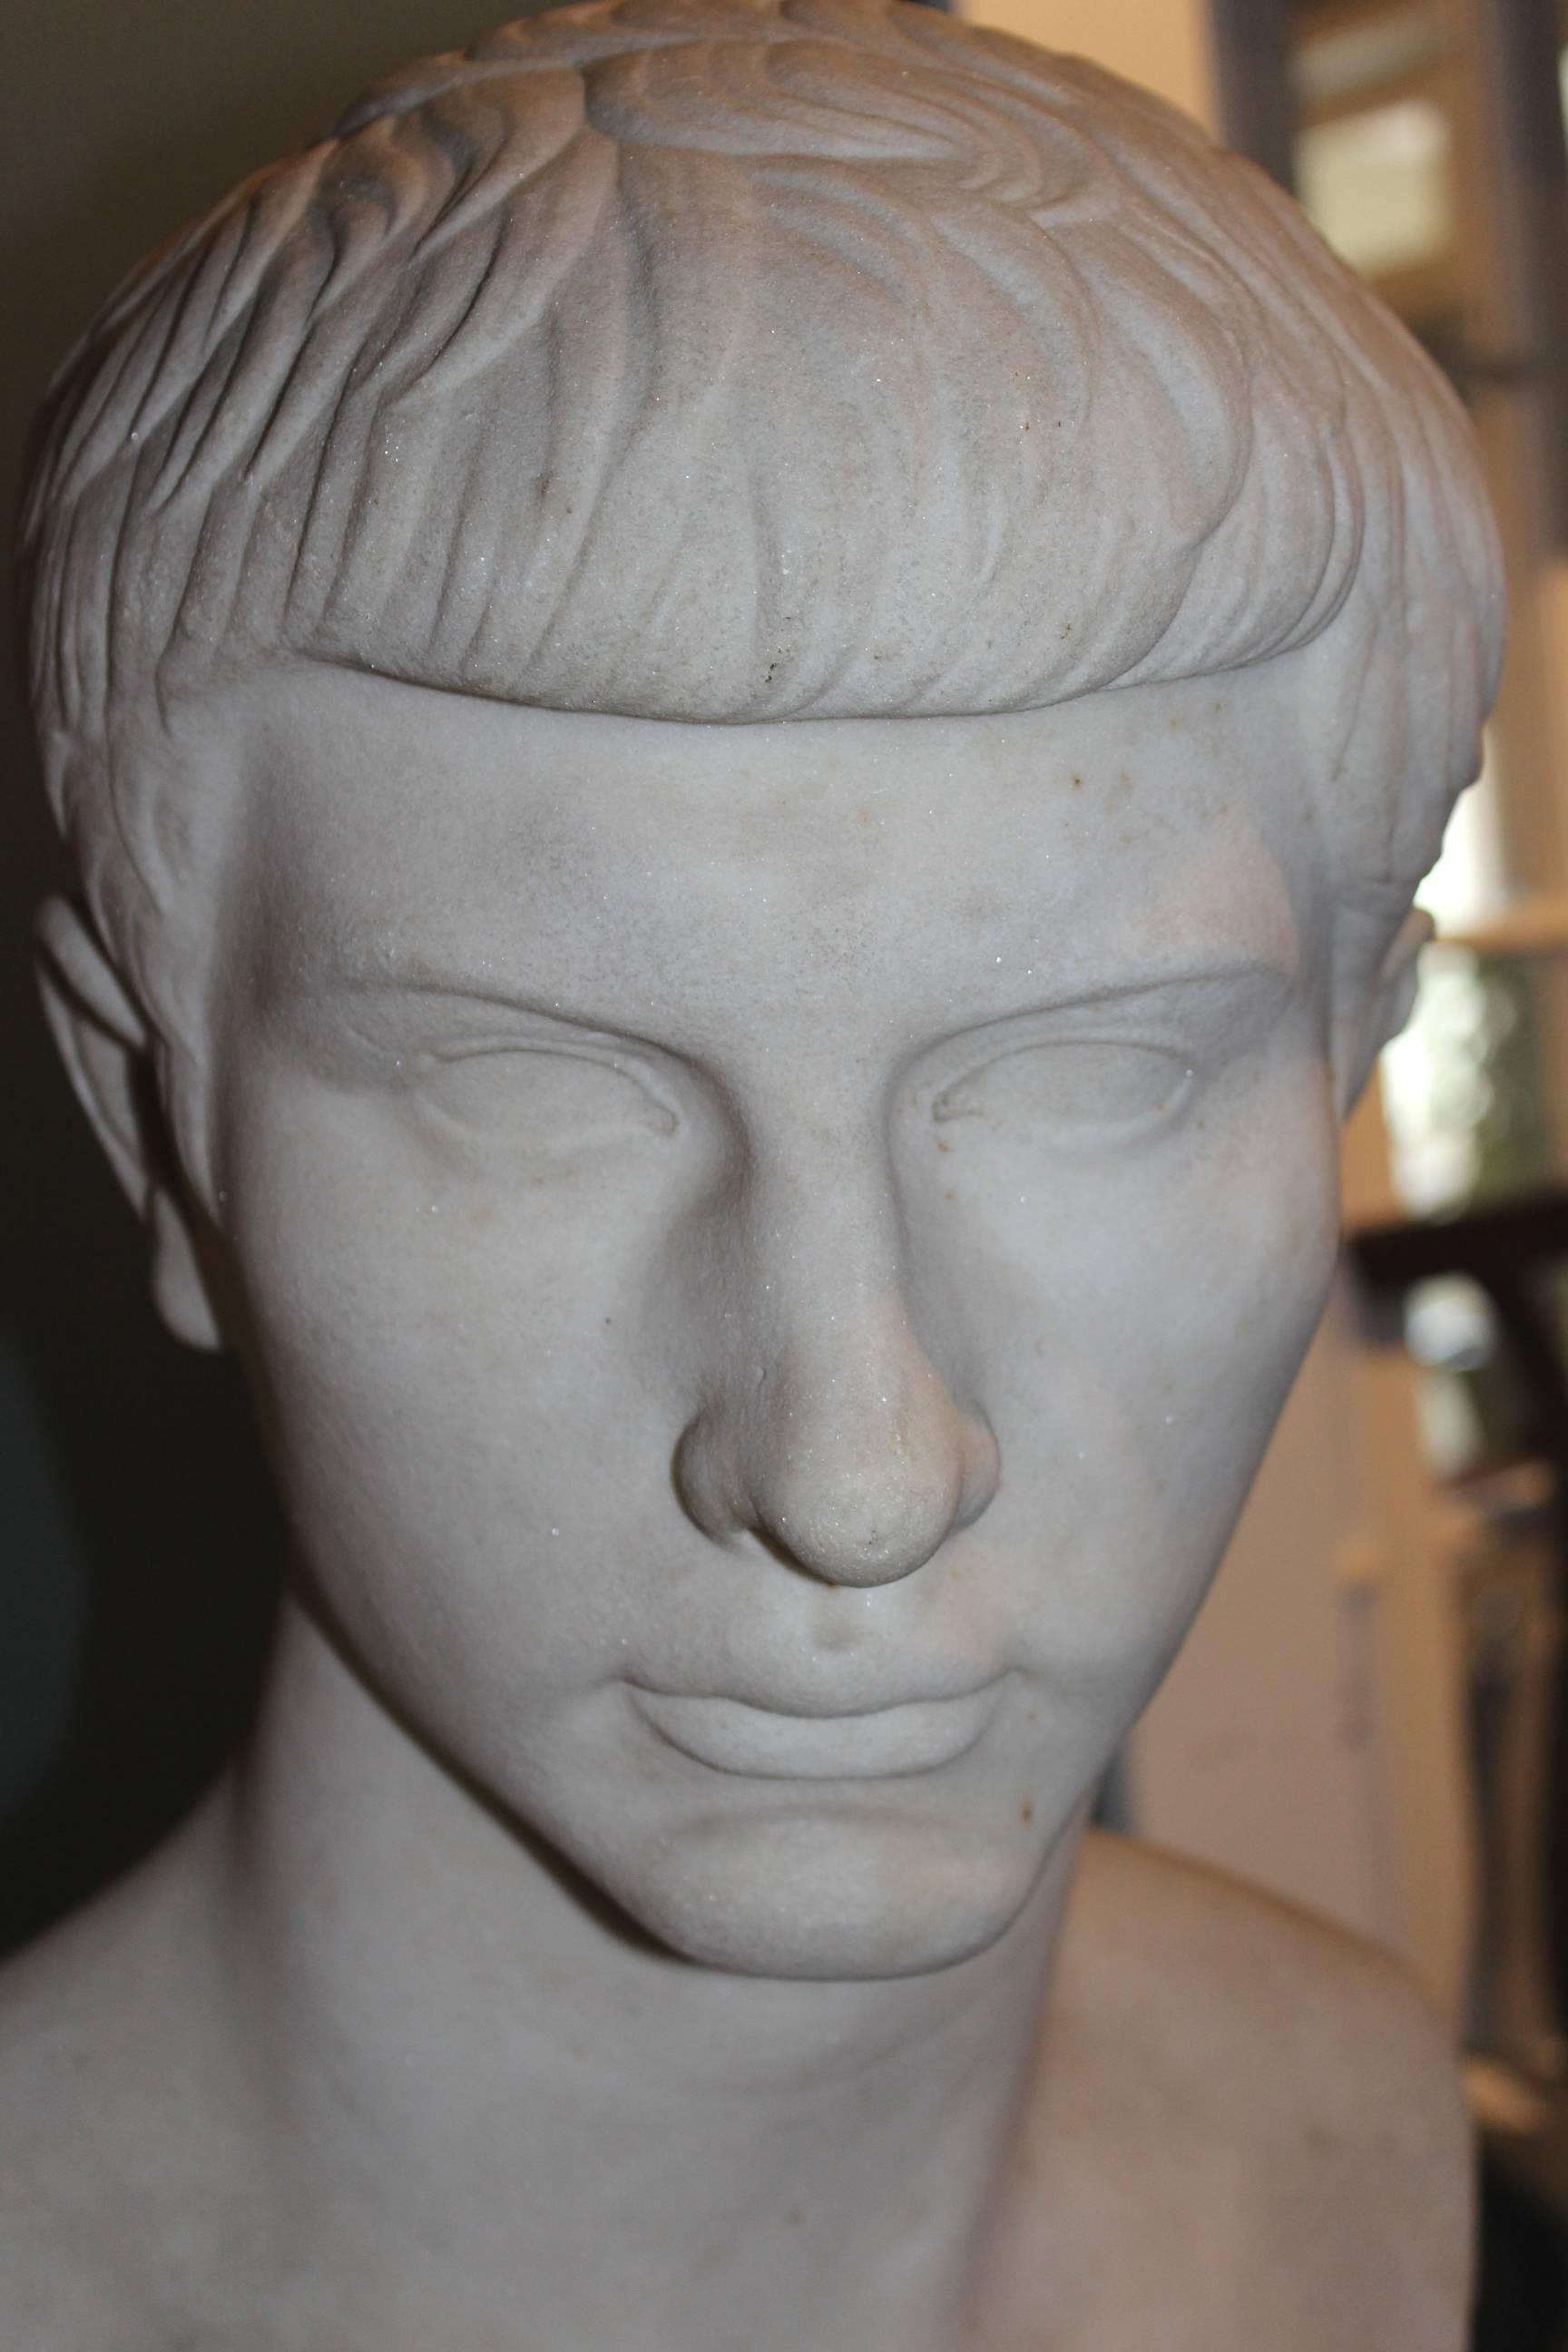 A fine example of a 19th century grand tour marble bust of Caesar attached to a round base or plinth, in very good overall condition, with minor restorations, losses and imperfections including a chip to socle as seen in photographs.